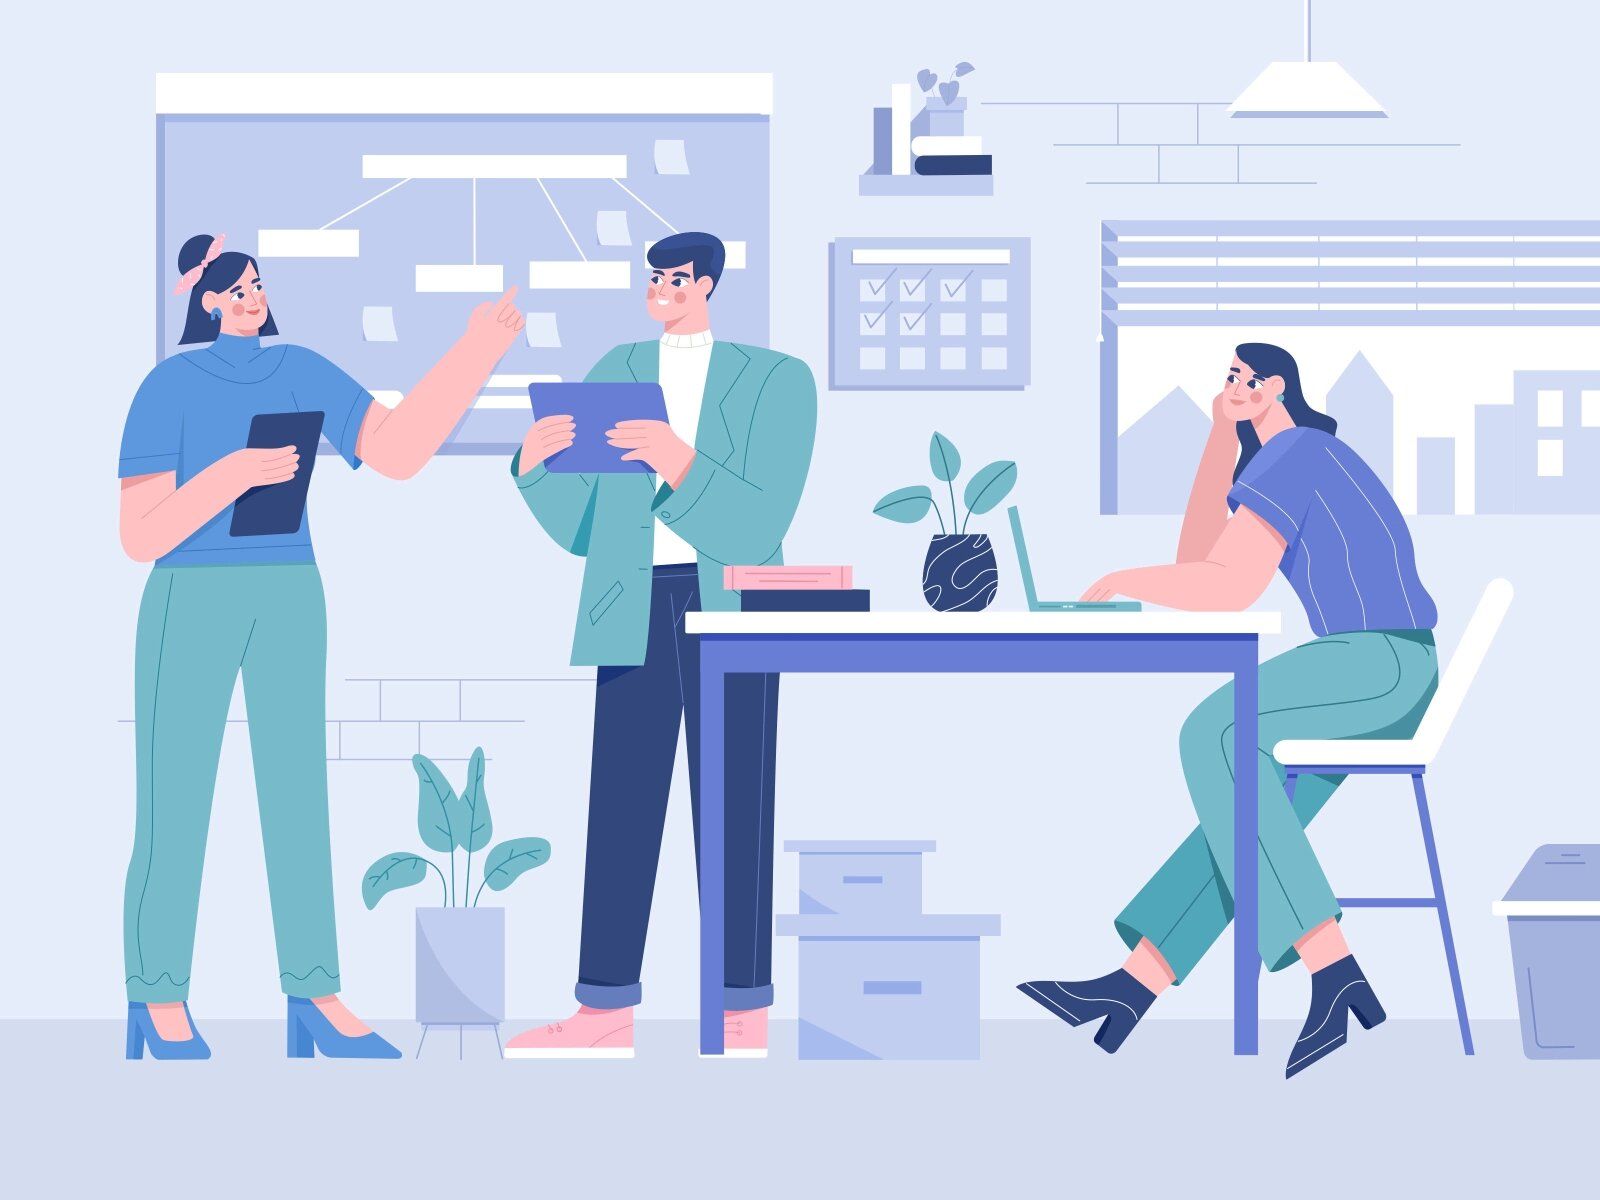 In this section, we’ll share our experience of negotiating with potential clients on building SaaS platforms for them (*image by [👑 UIGO Design](https://dribbble.com/UIGODesign){ rel="nofollow" target="_blank" .default-md}*)